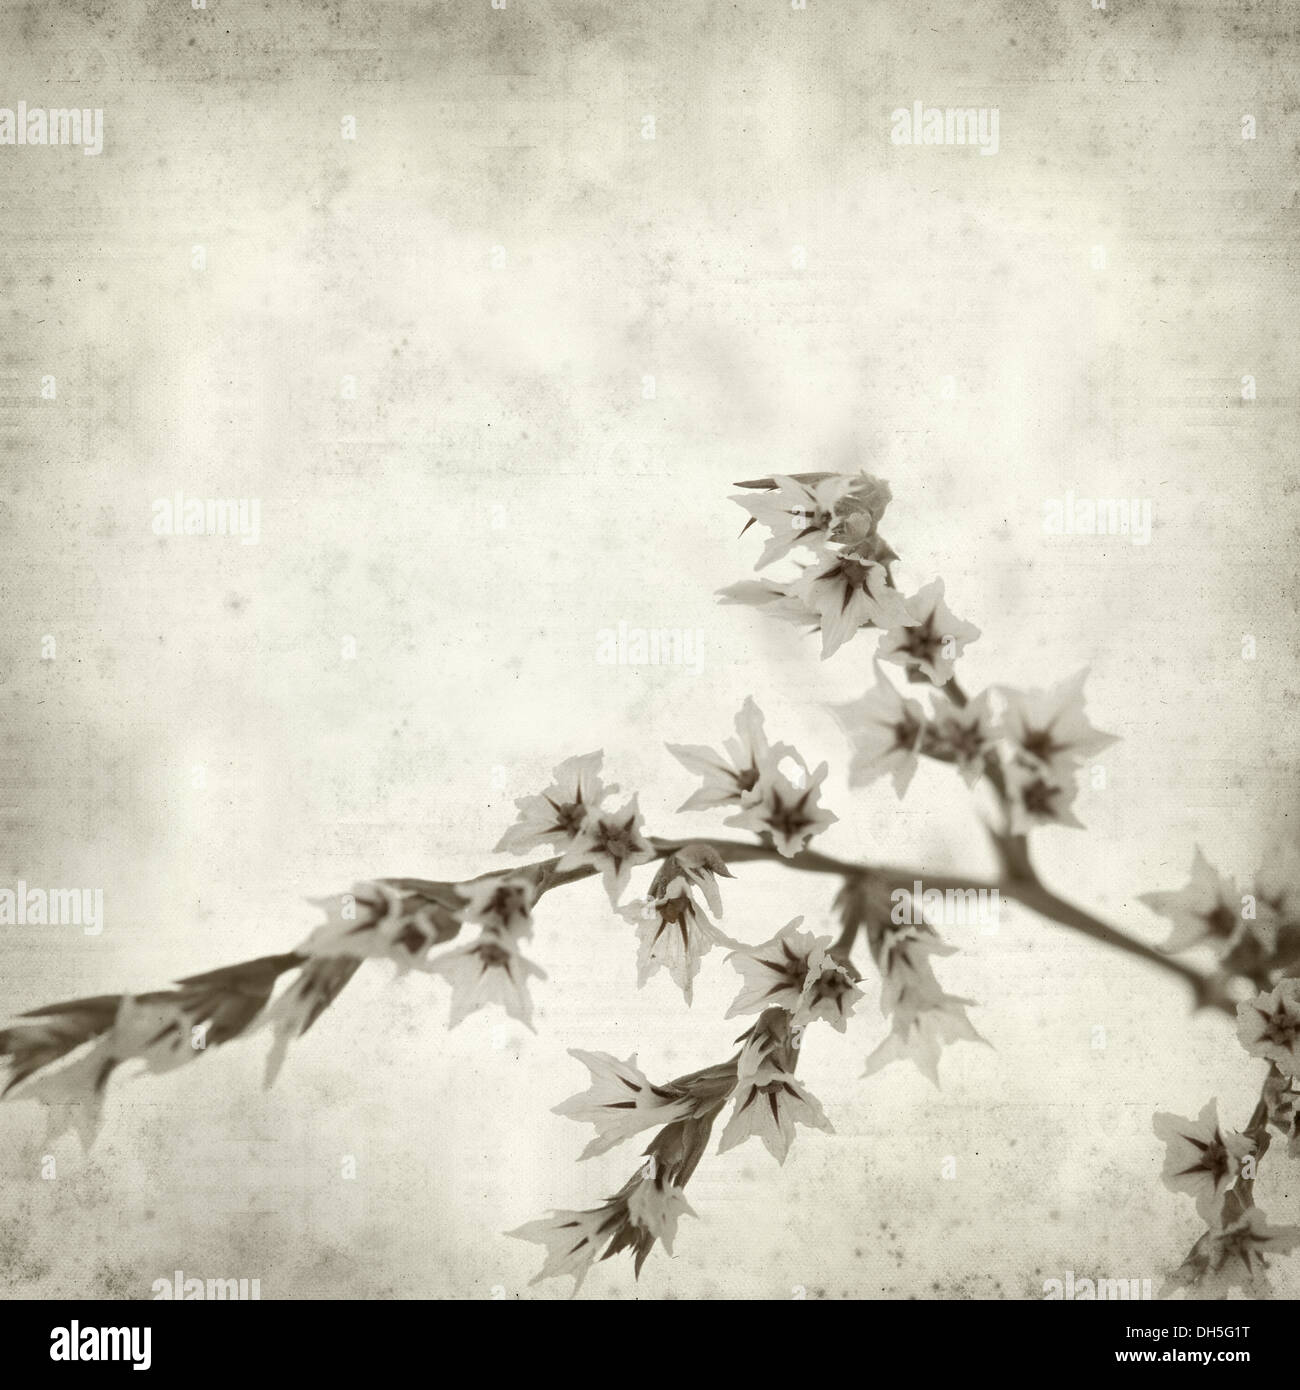 textured old paper background with limonium flowers Stock Photo